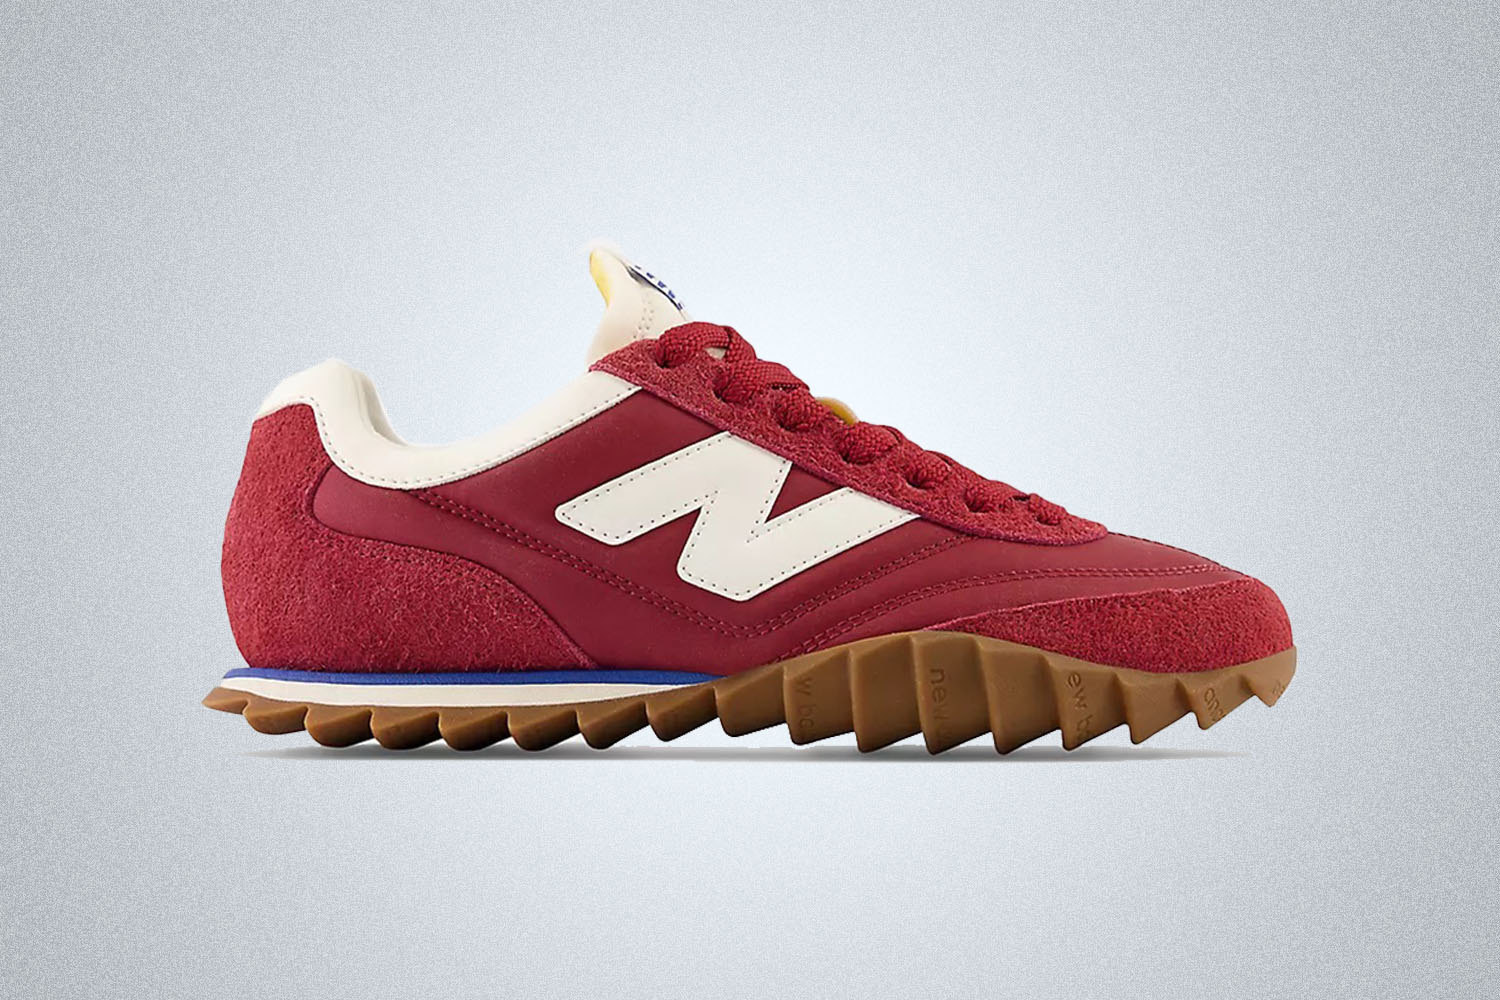 A red New Balance RC30 on a grey background